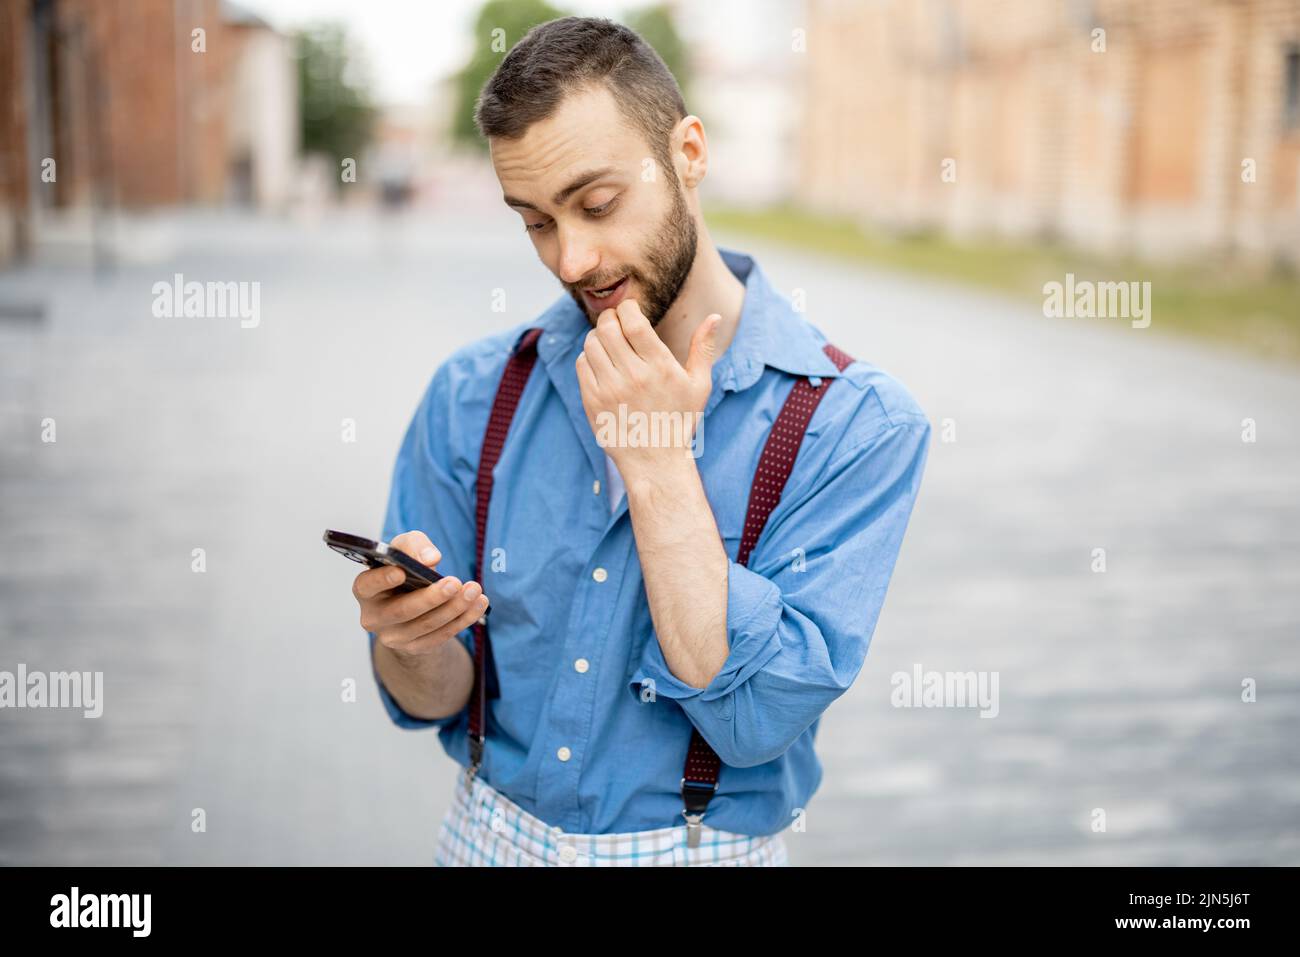 Portrait of weird businessman uses phone outdoors. Cool guy wearing blue shirt with suspenders Stock Photo